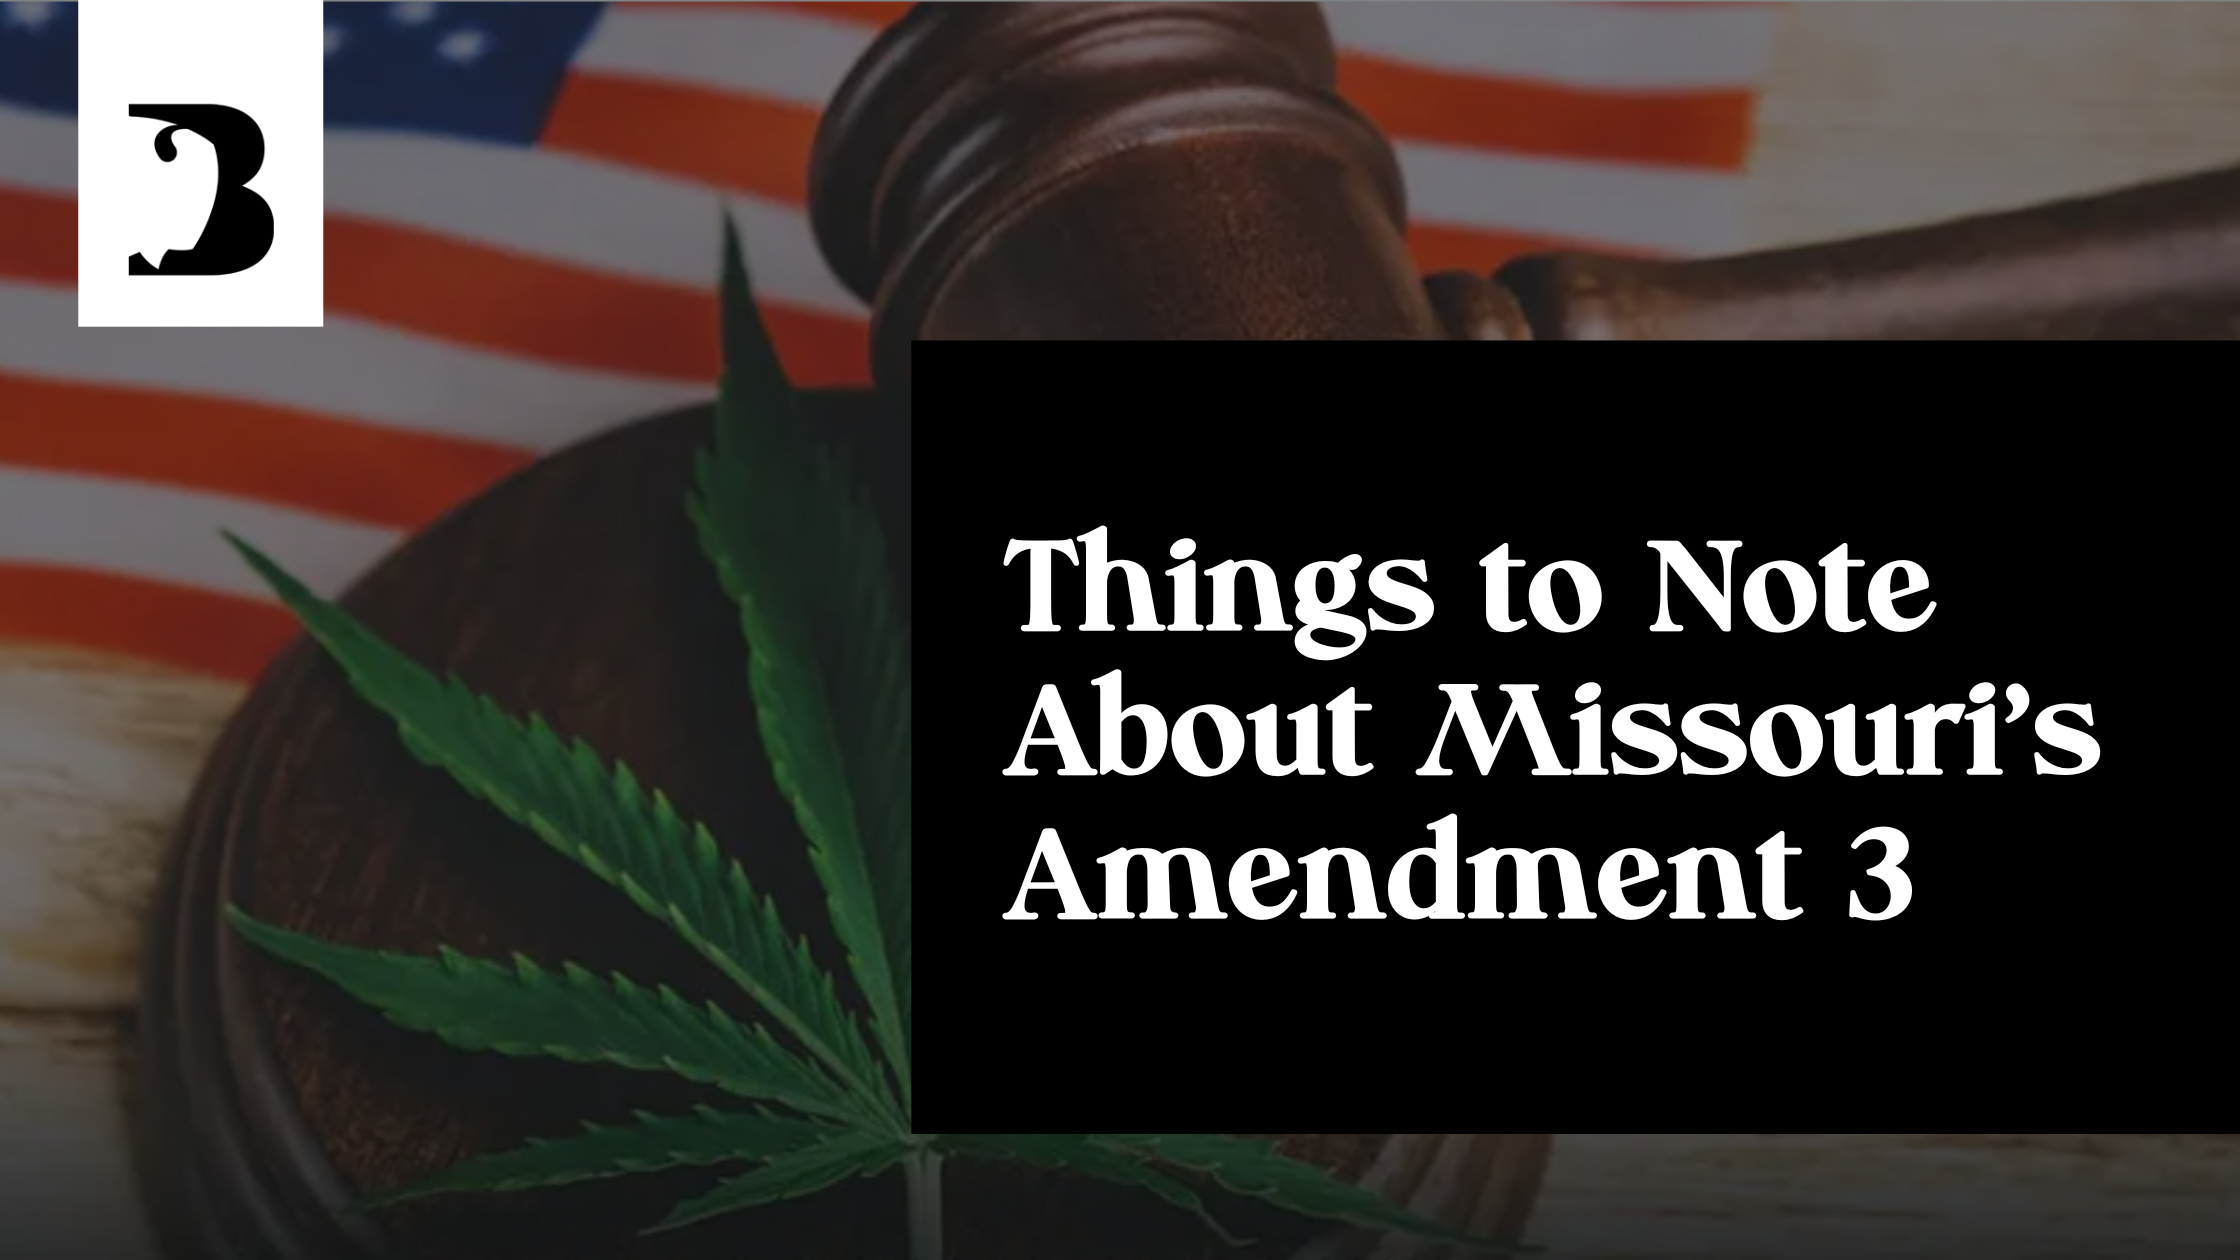 Things to Note About Missouri’s Amendment 3